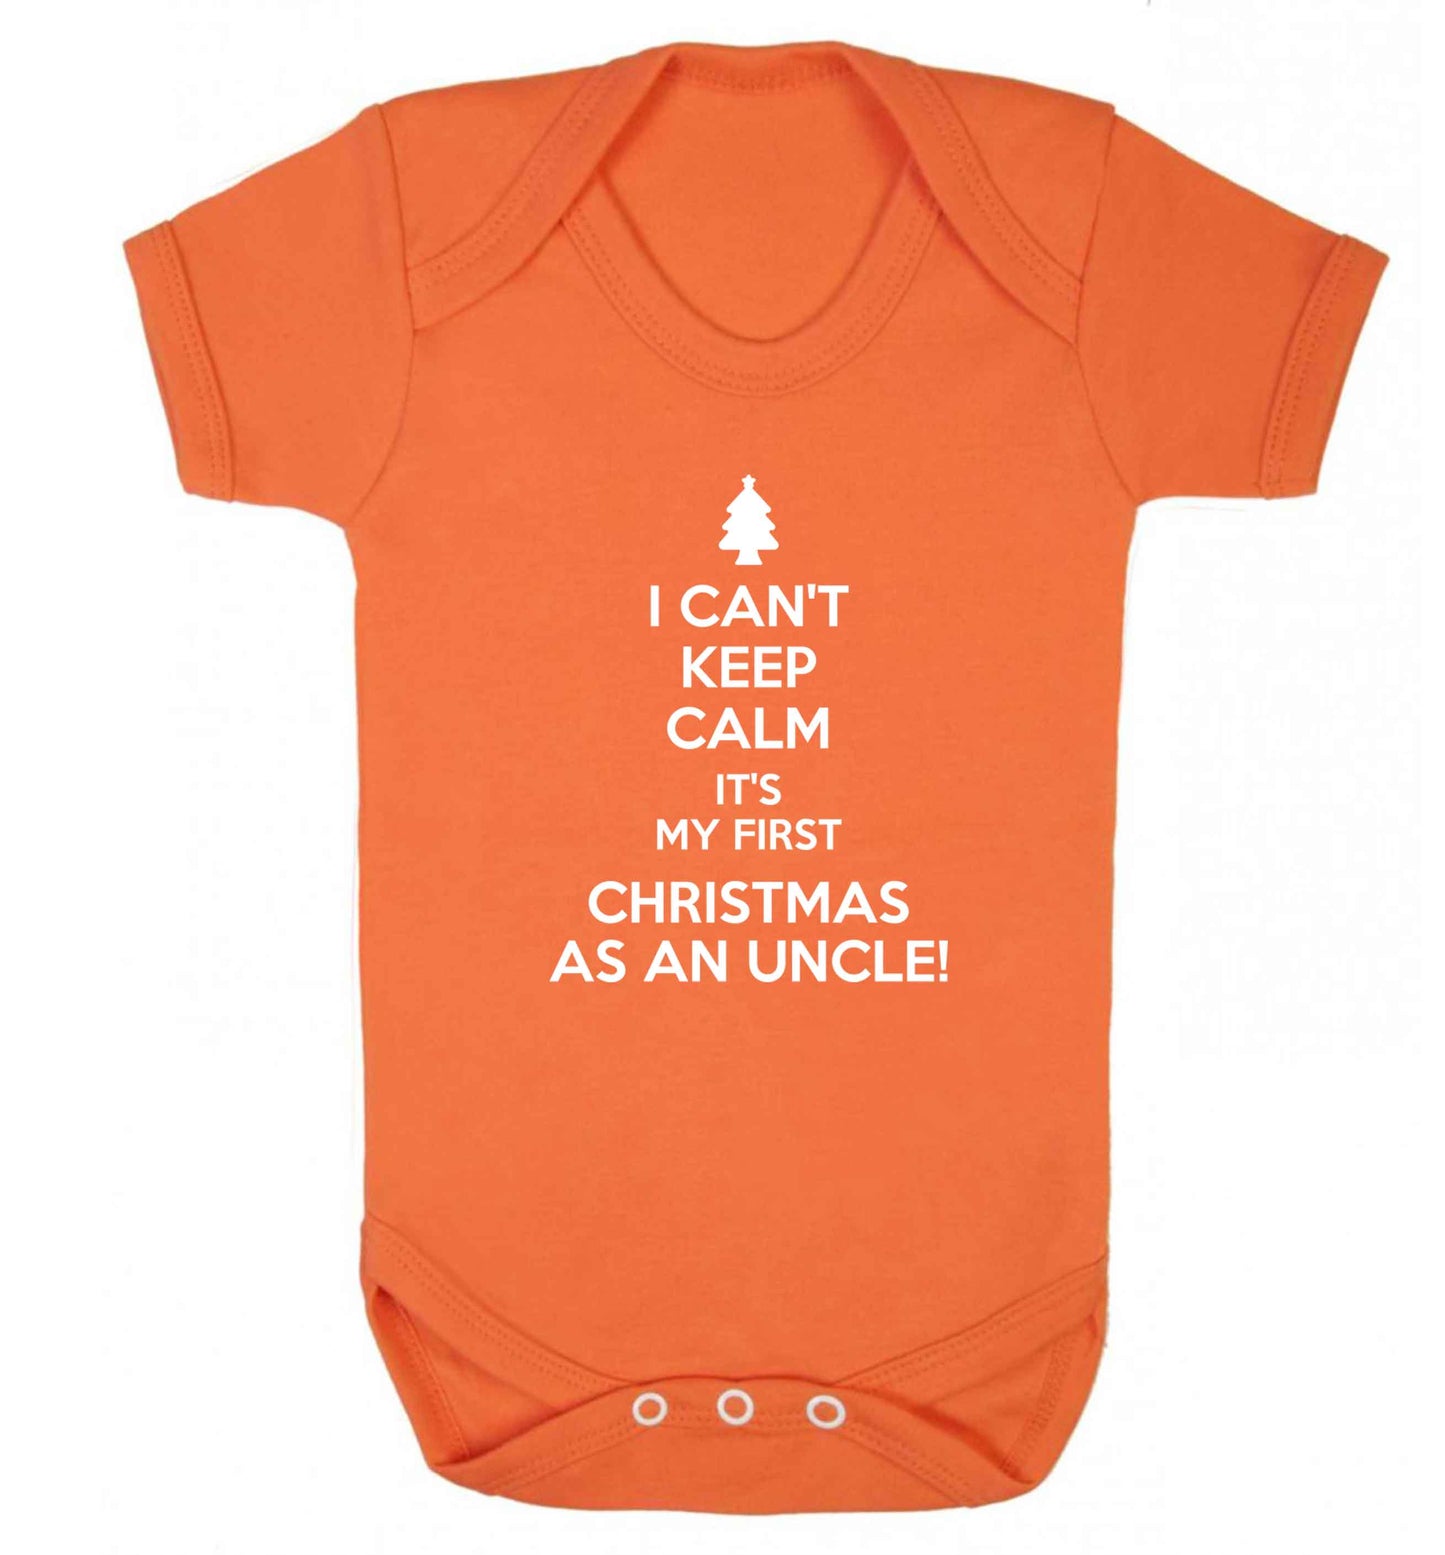 I can't keep calm it's my first Christmas as an uncle! Baby Vest orange 18-24 months